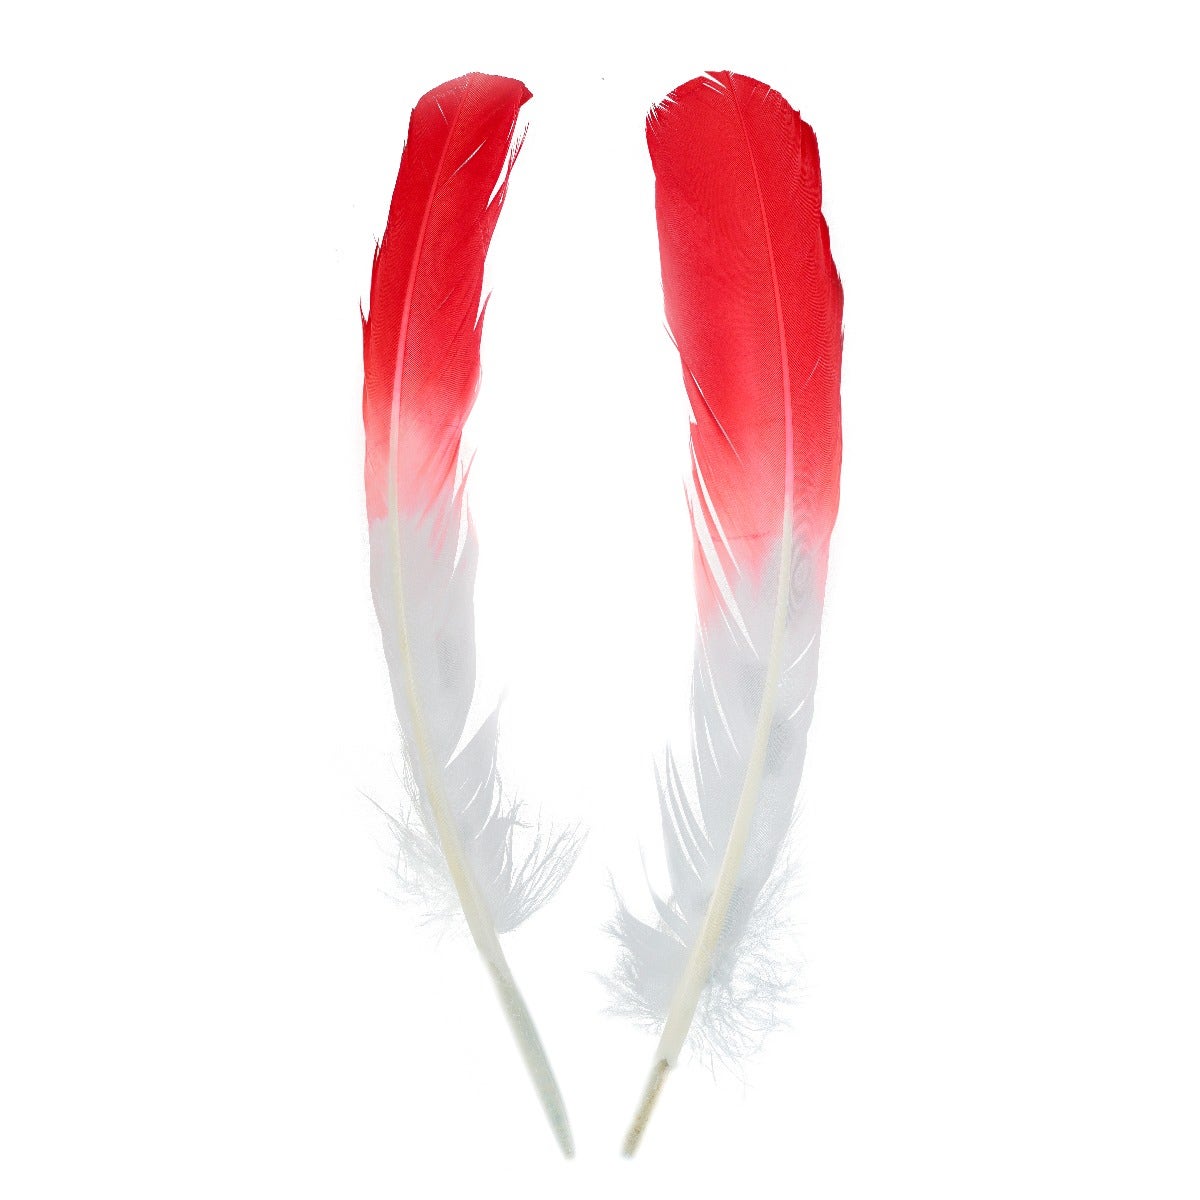 Ombré Turkey Quill Feathers 10-12” 2 pc - Coral/White